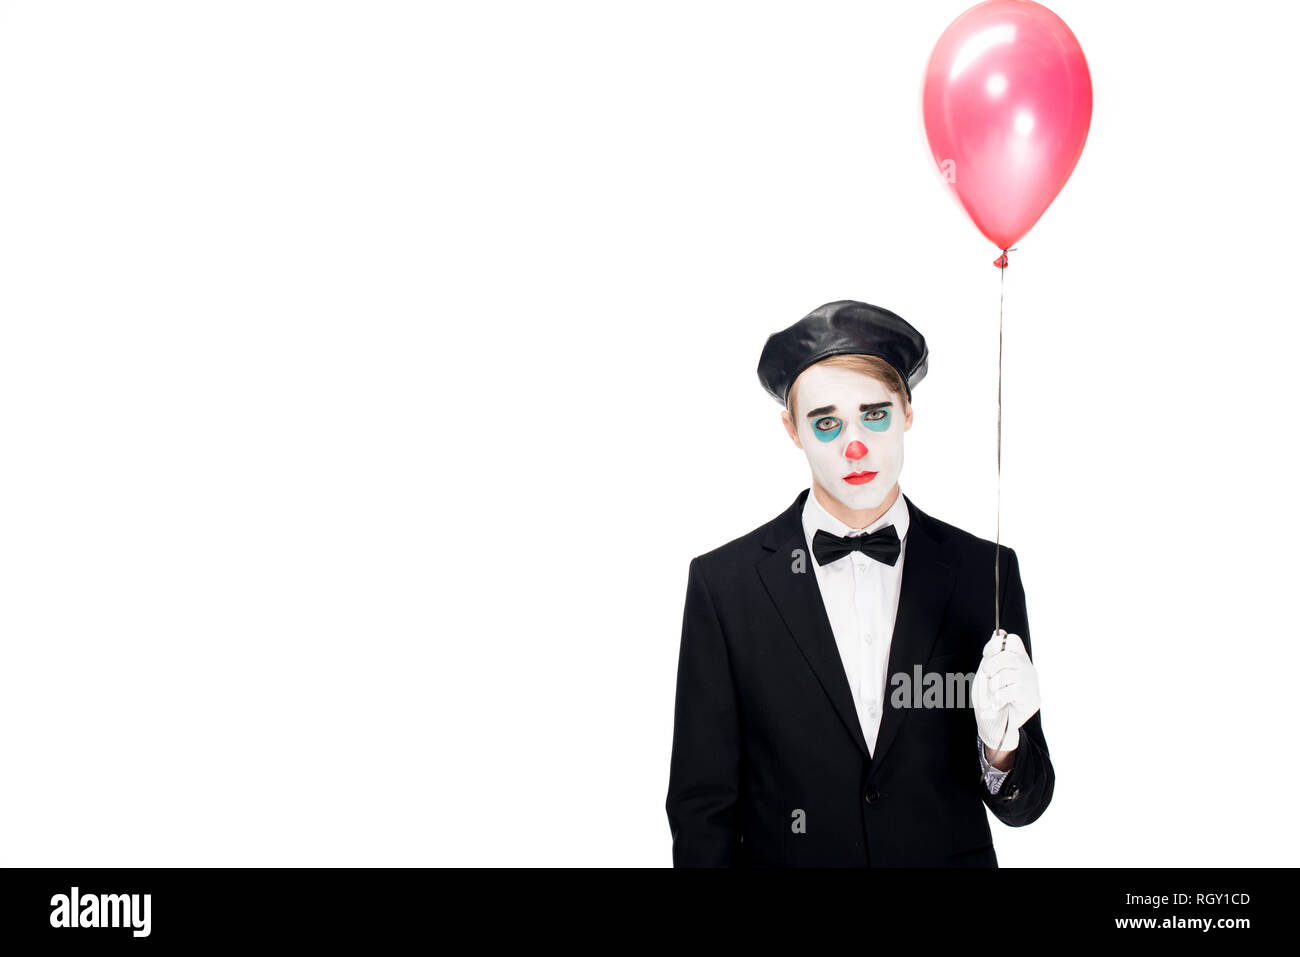 upset clown in suit and black beret holding balloon and standing isolated on white Stock Photo